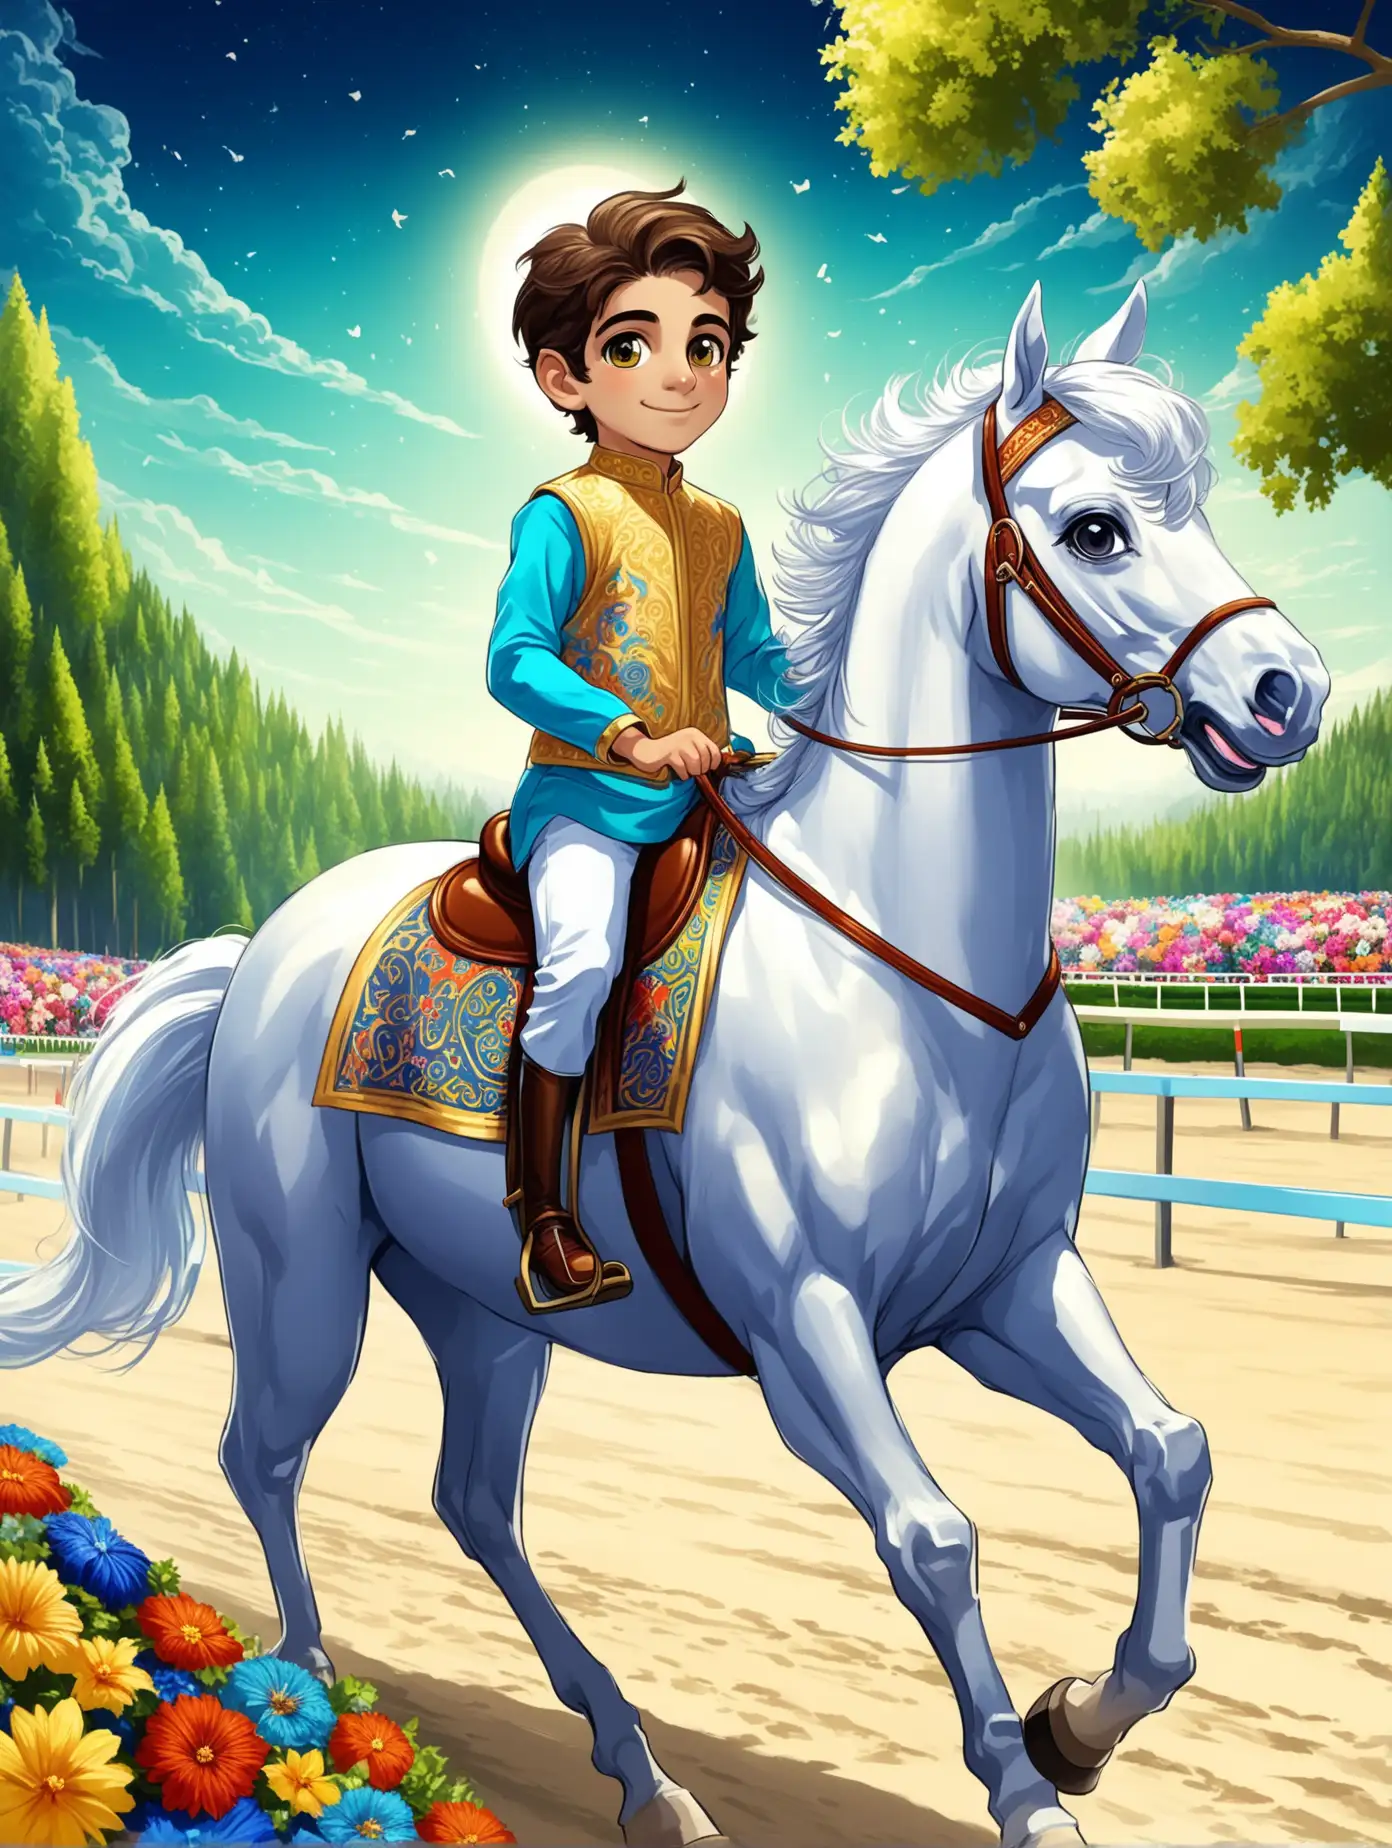 Character Persian 9 years old boy(riding horse, smaller eyes, bigger nose, white skin, cute, smiling, clothes full of Persian designs, heavenly boy).

Atmosphere high-tech horse racing field at beach, flowers, forest.